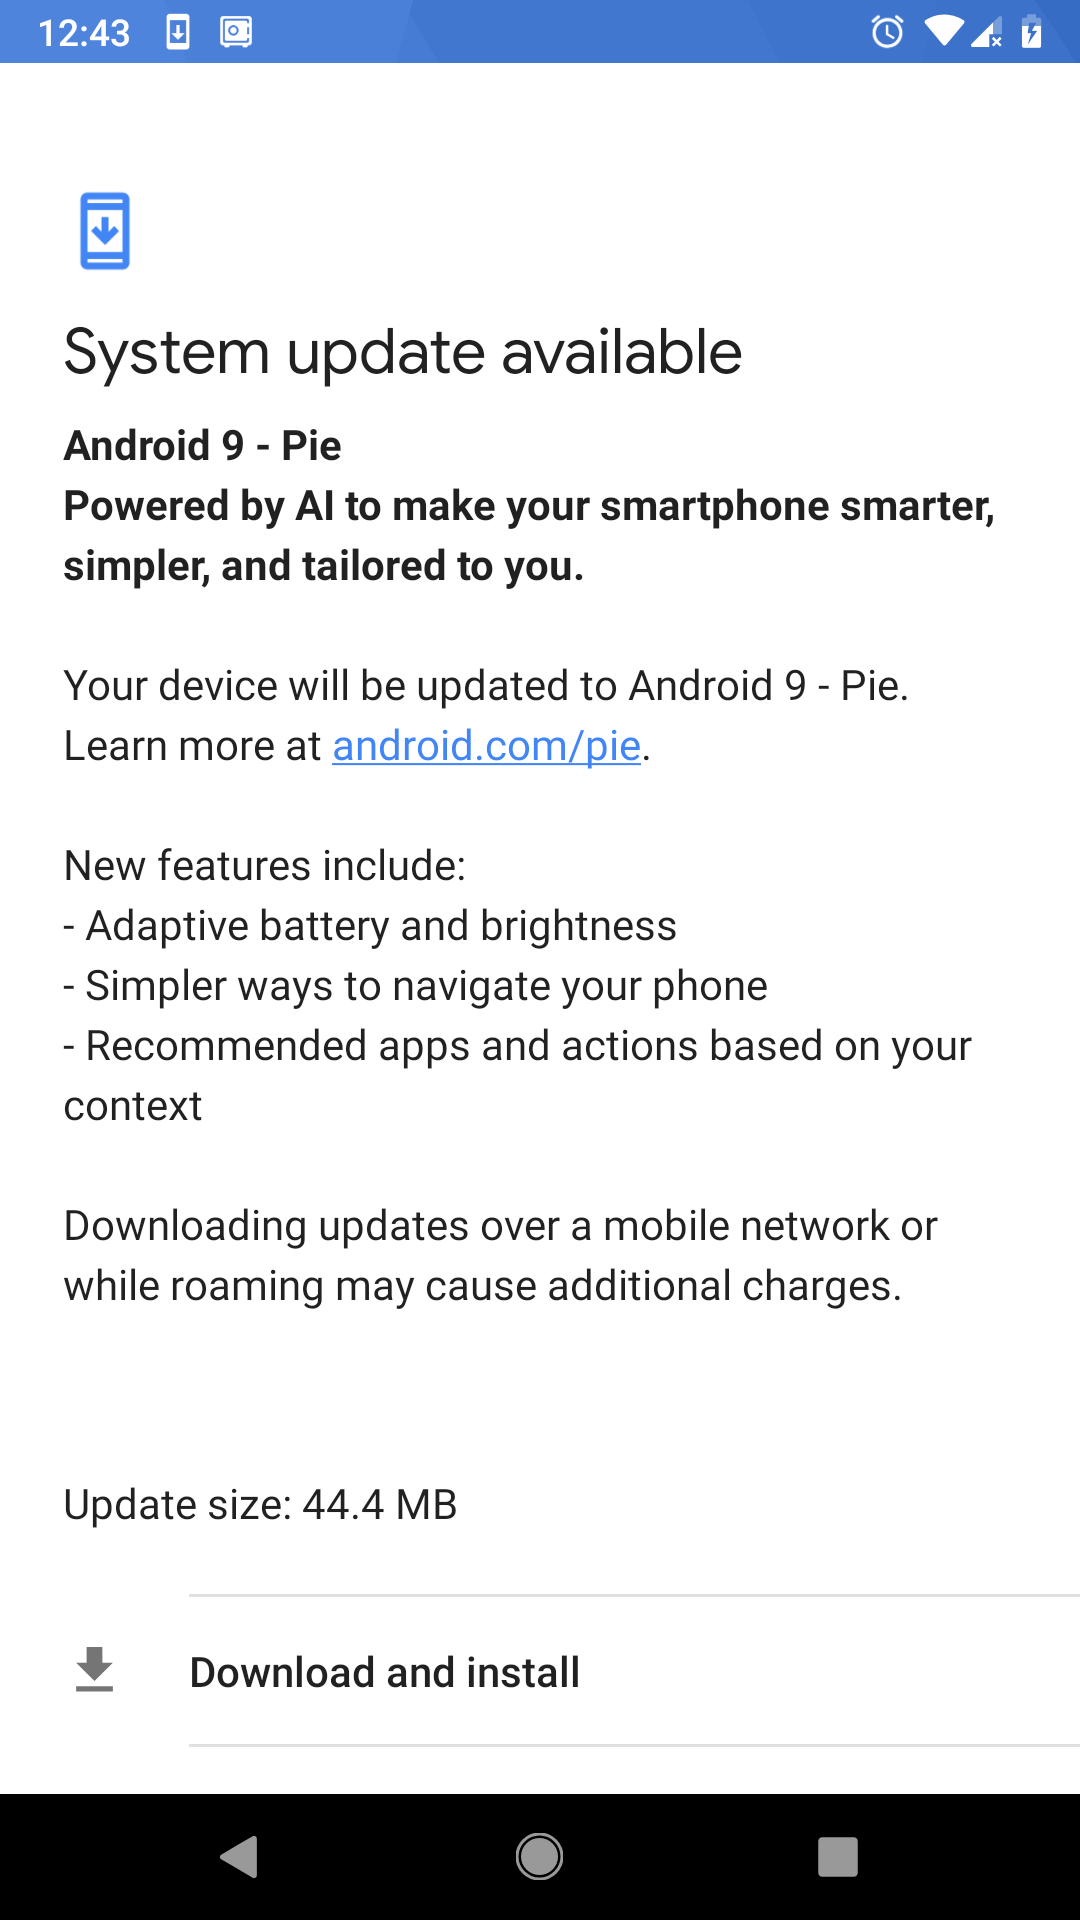 Google Relased New Android 9 Pie Features specs 